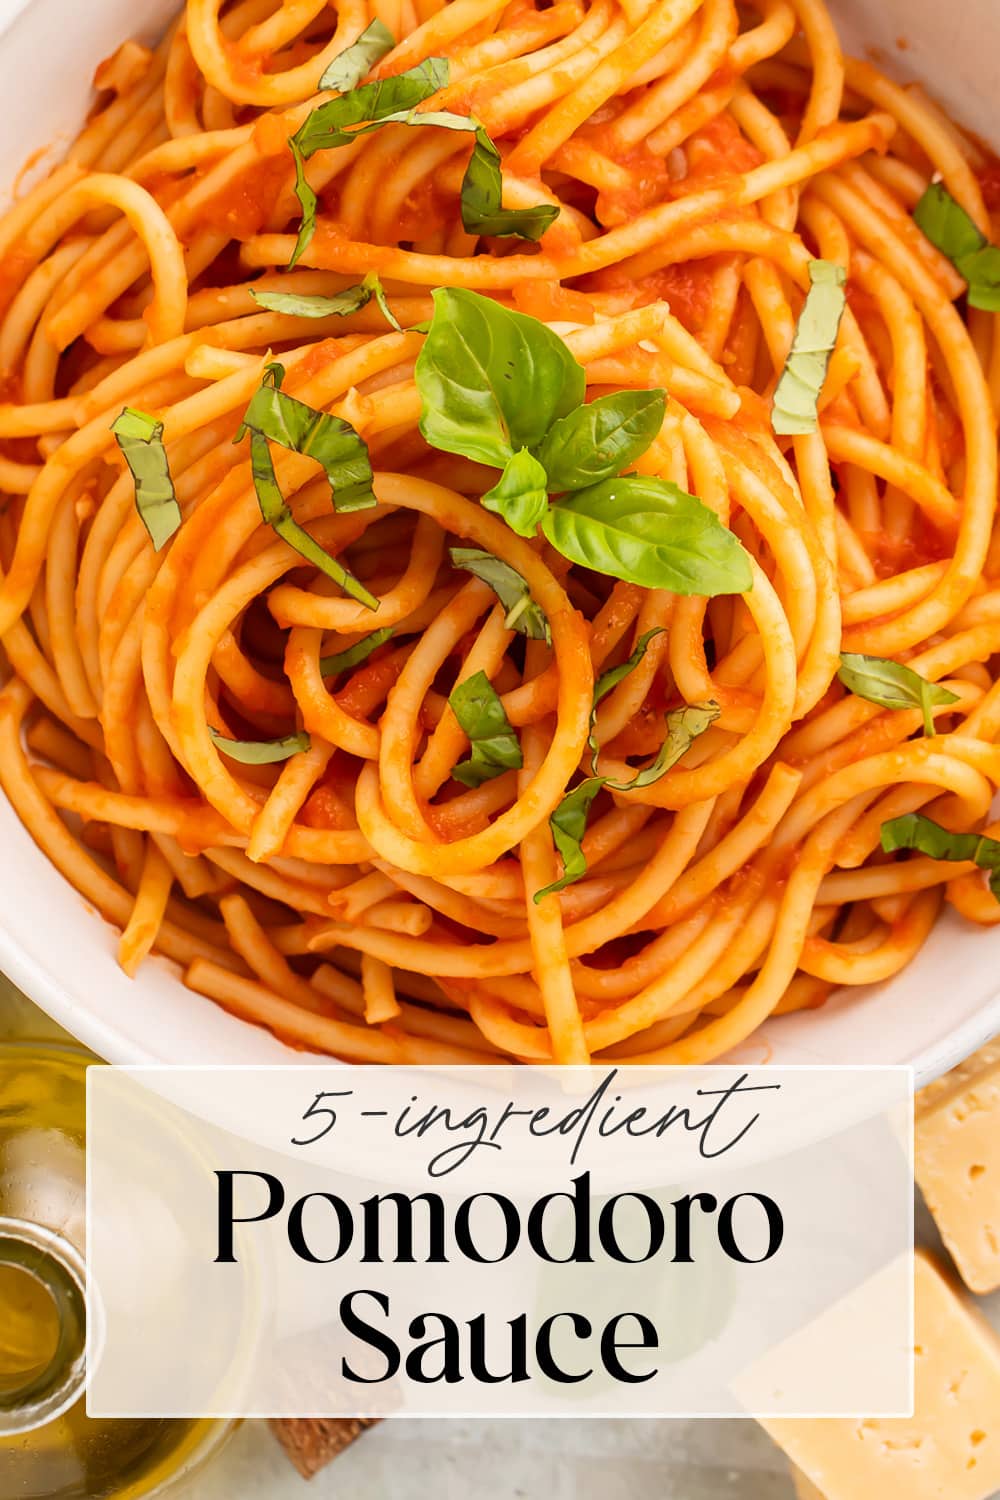 Pin graphic for pomodoro sauce.